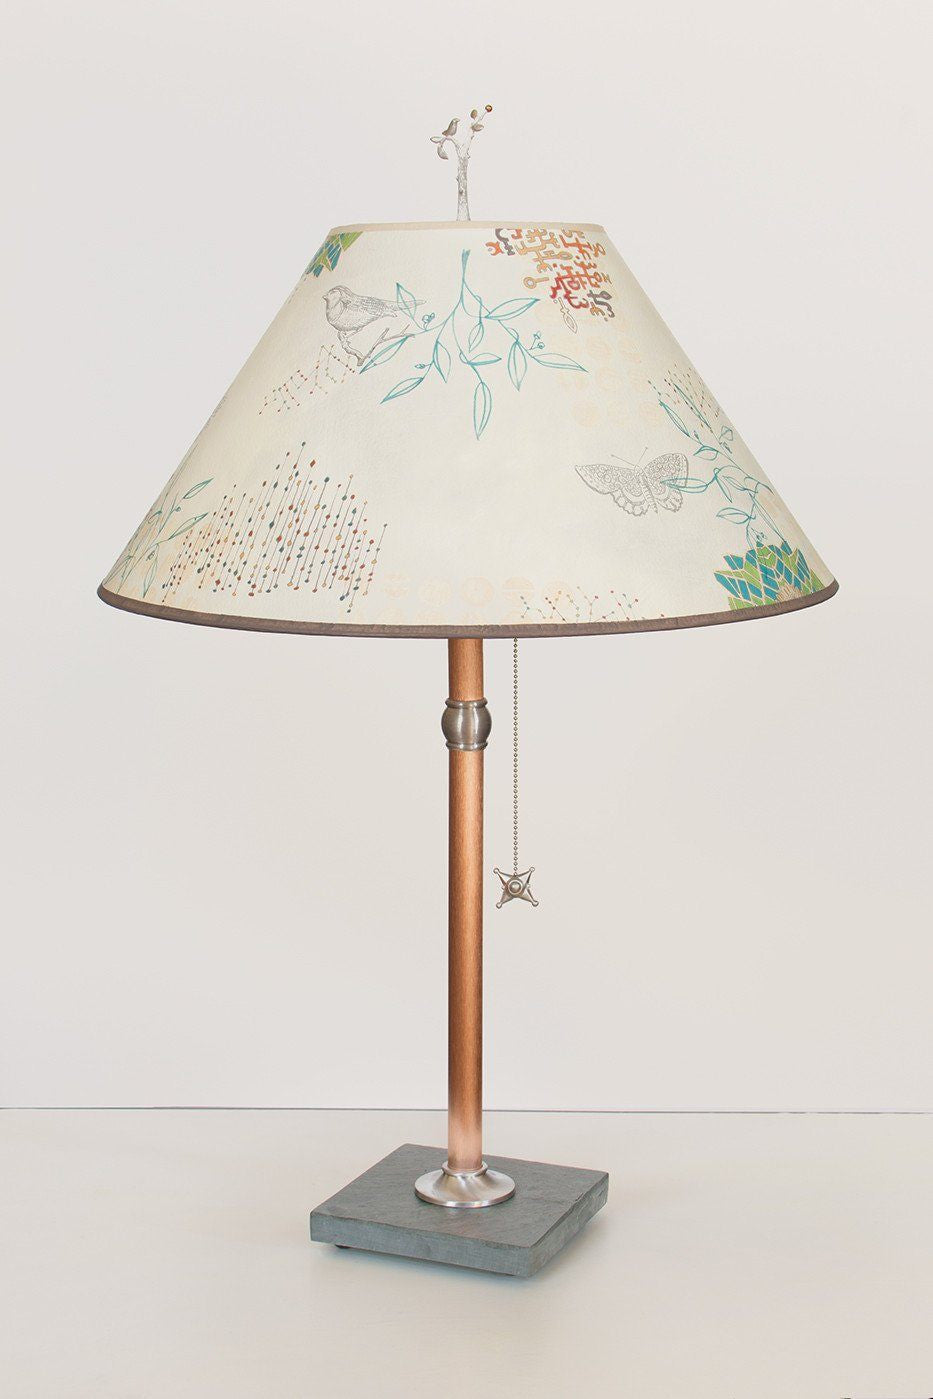 Copper Table Lamp on Vermont Slate with Large Conical Shade in Ecru Journey